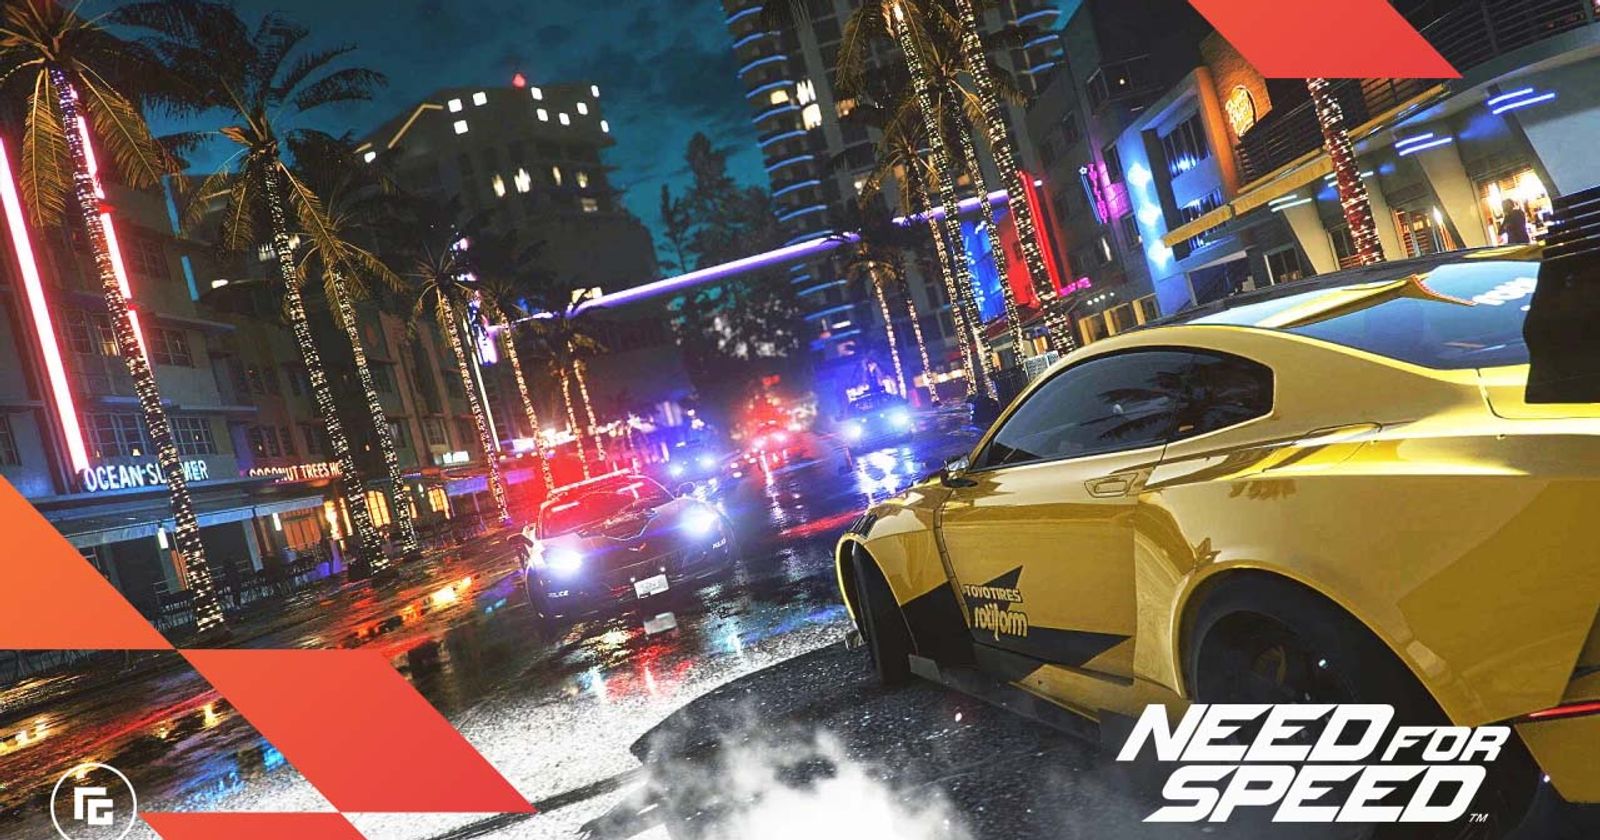 EA readying Need for Speed threesome - GameSpot